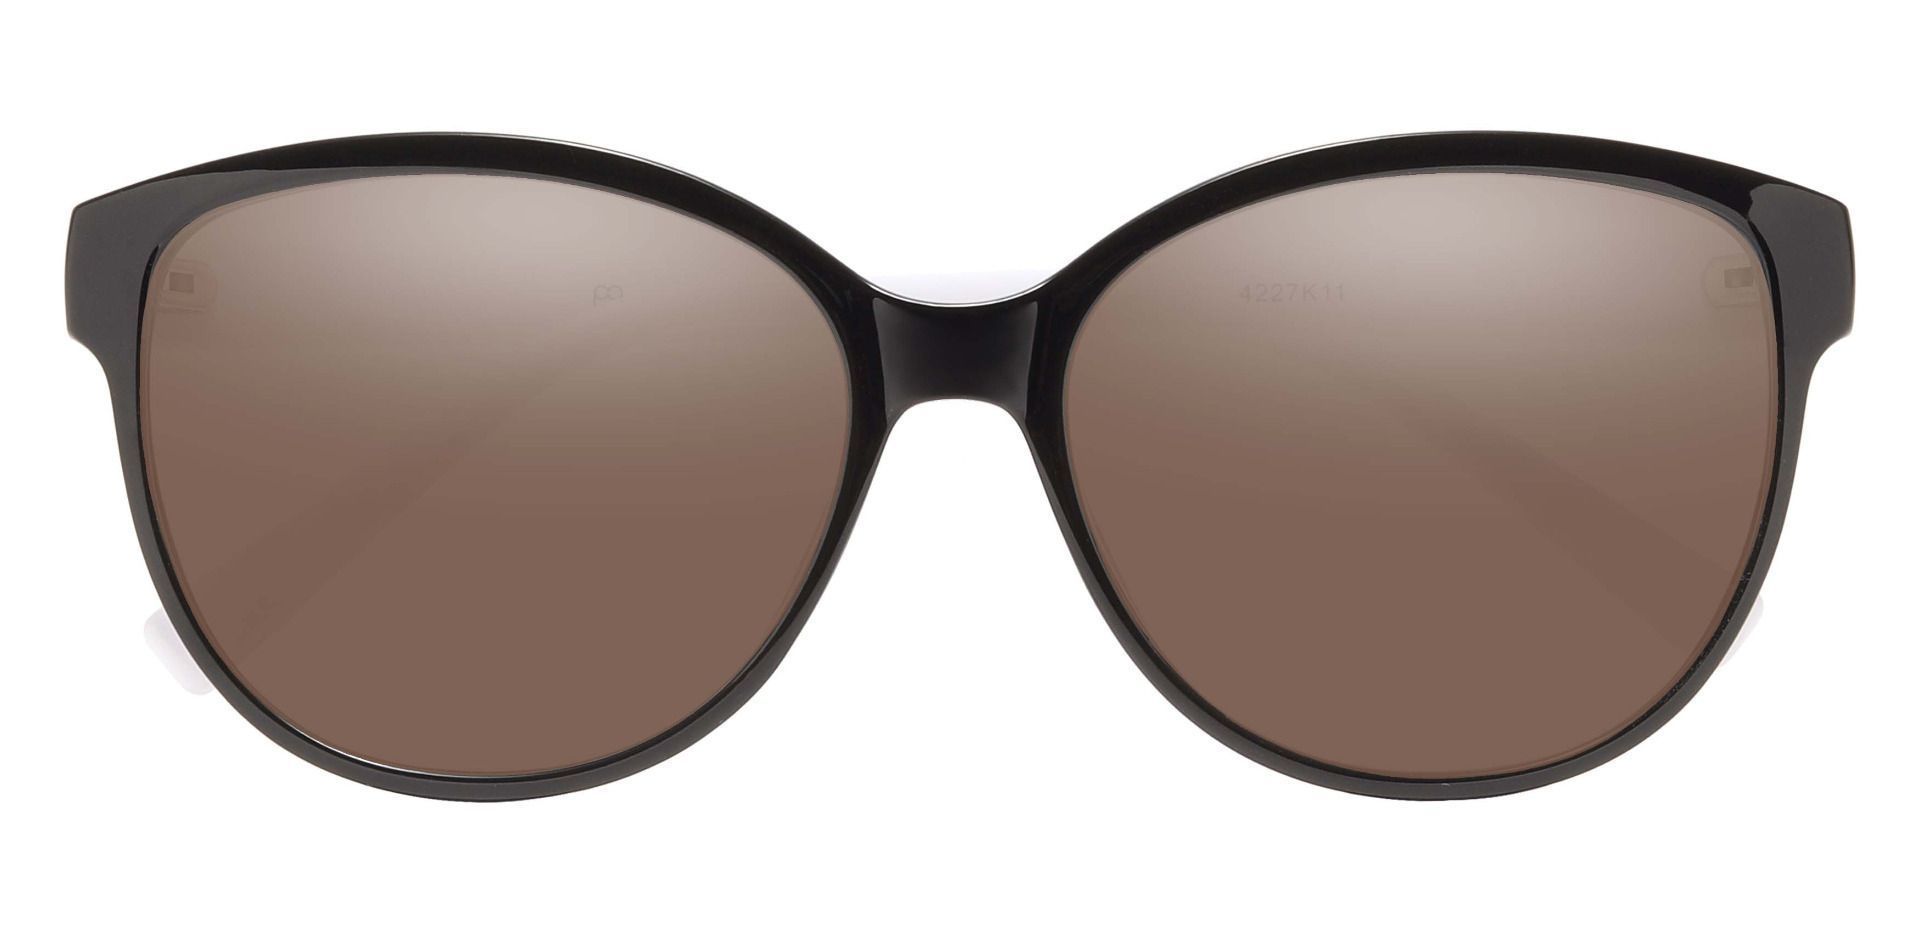 Rabia Oval Lined Bifocal Sunglasses - Black Frame With Brown Lenses